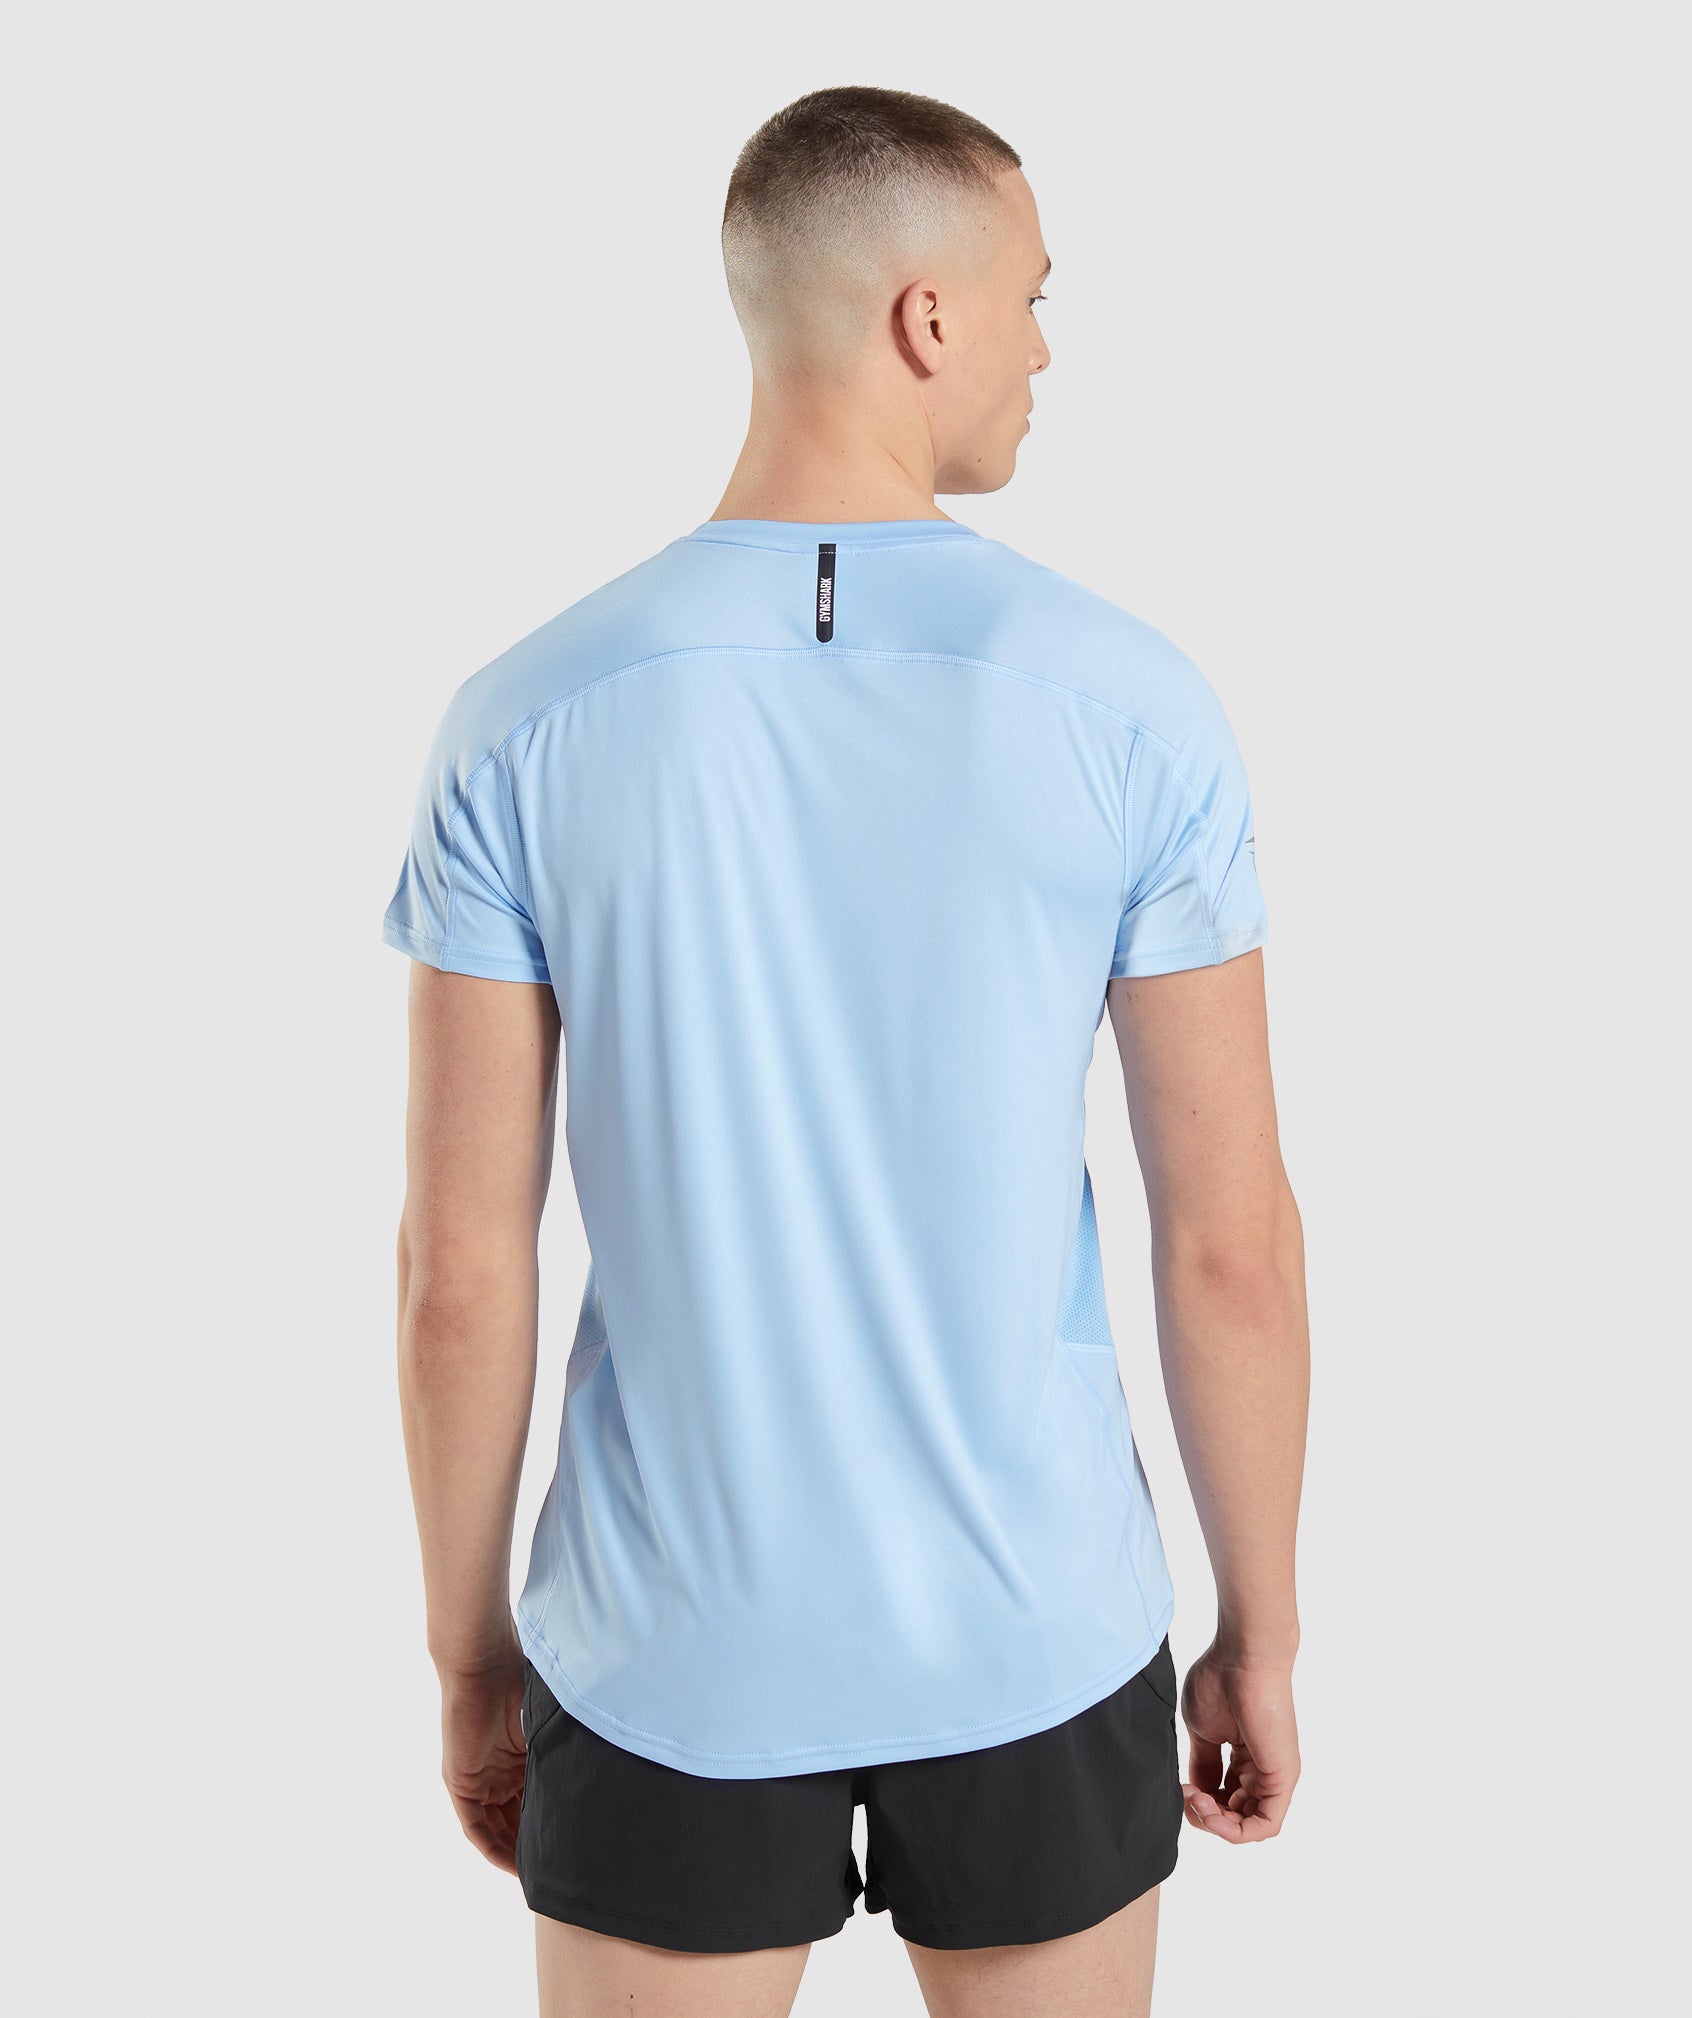 Speed Evolve T-Shirt in Moonstone Blue - view 2